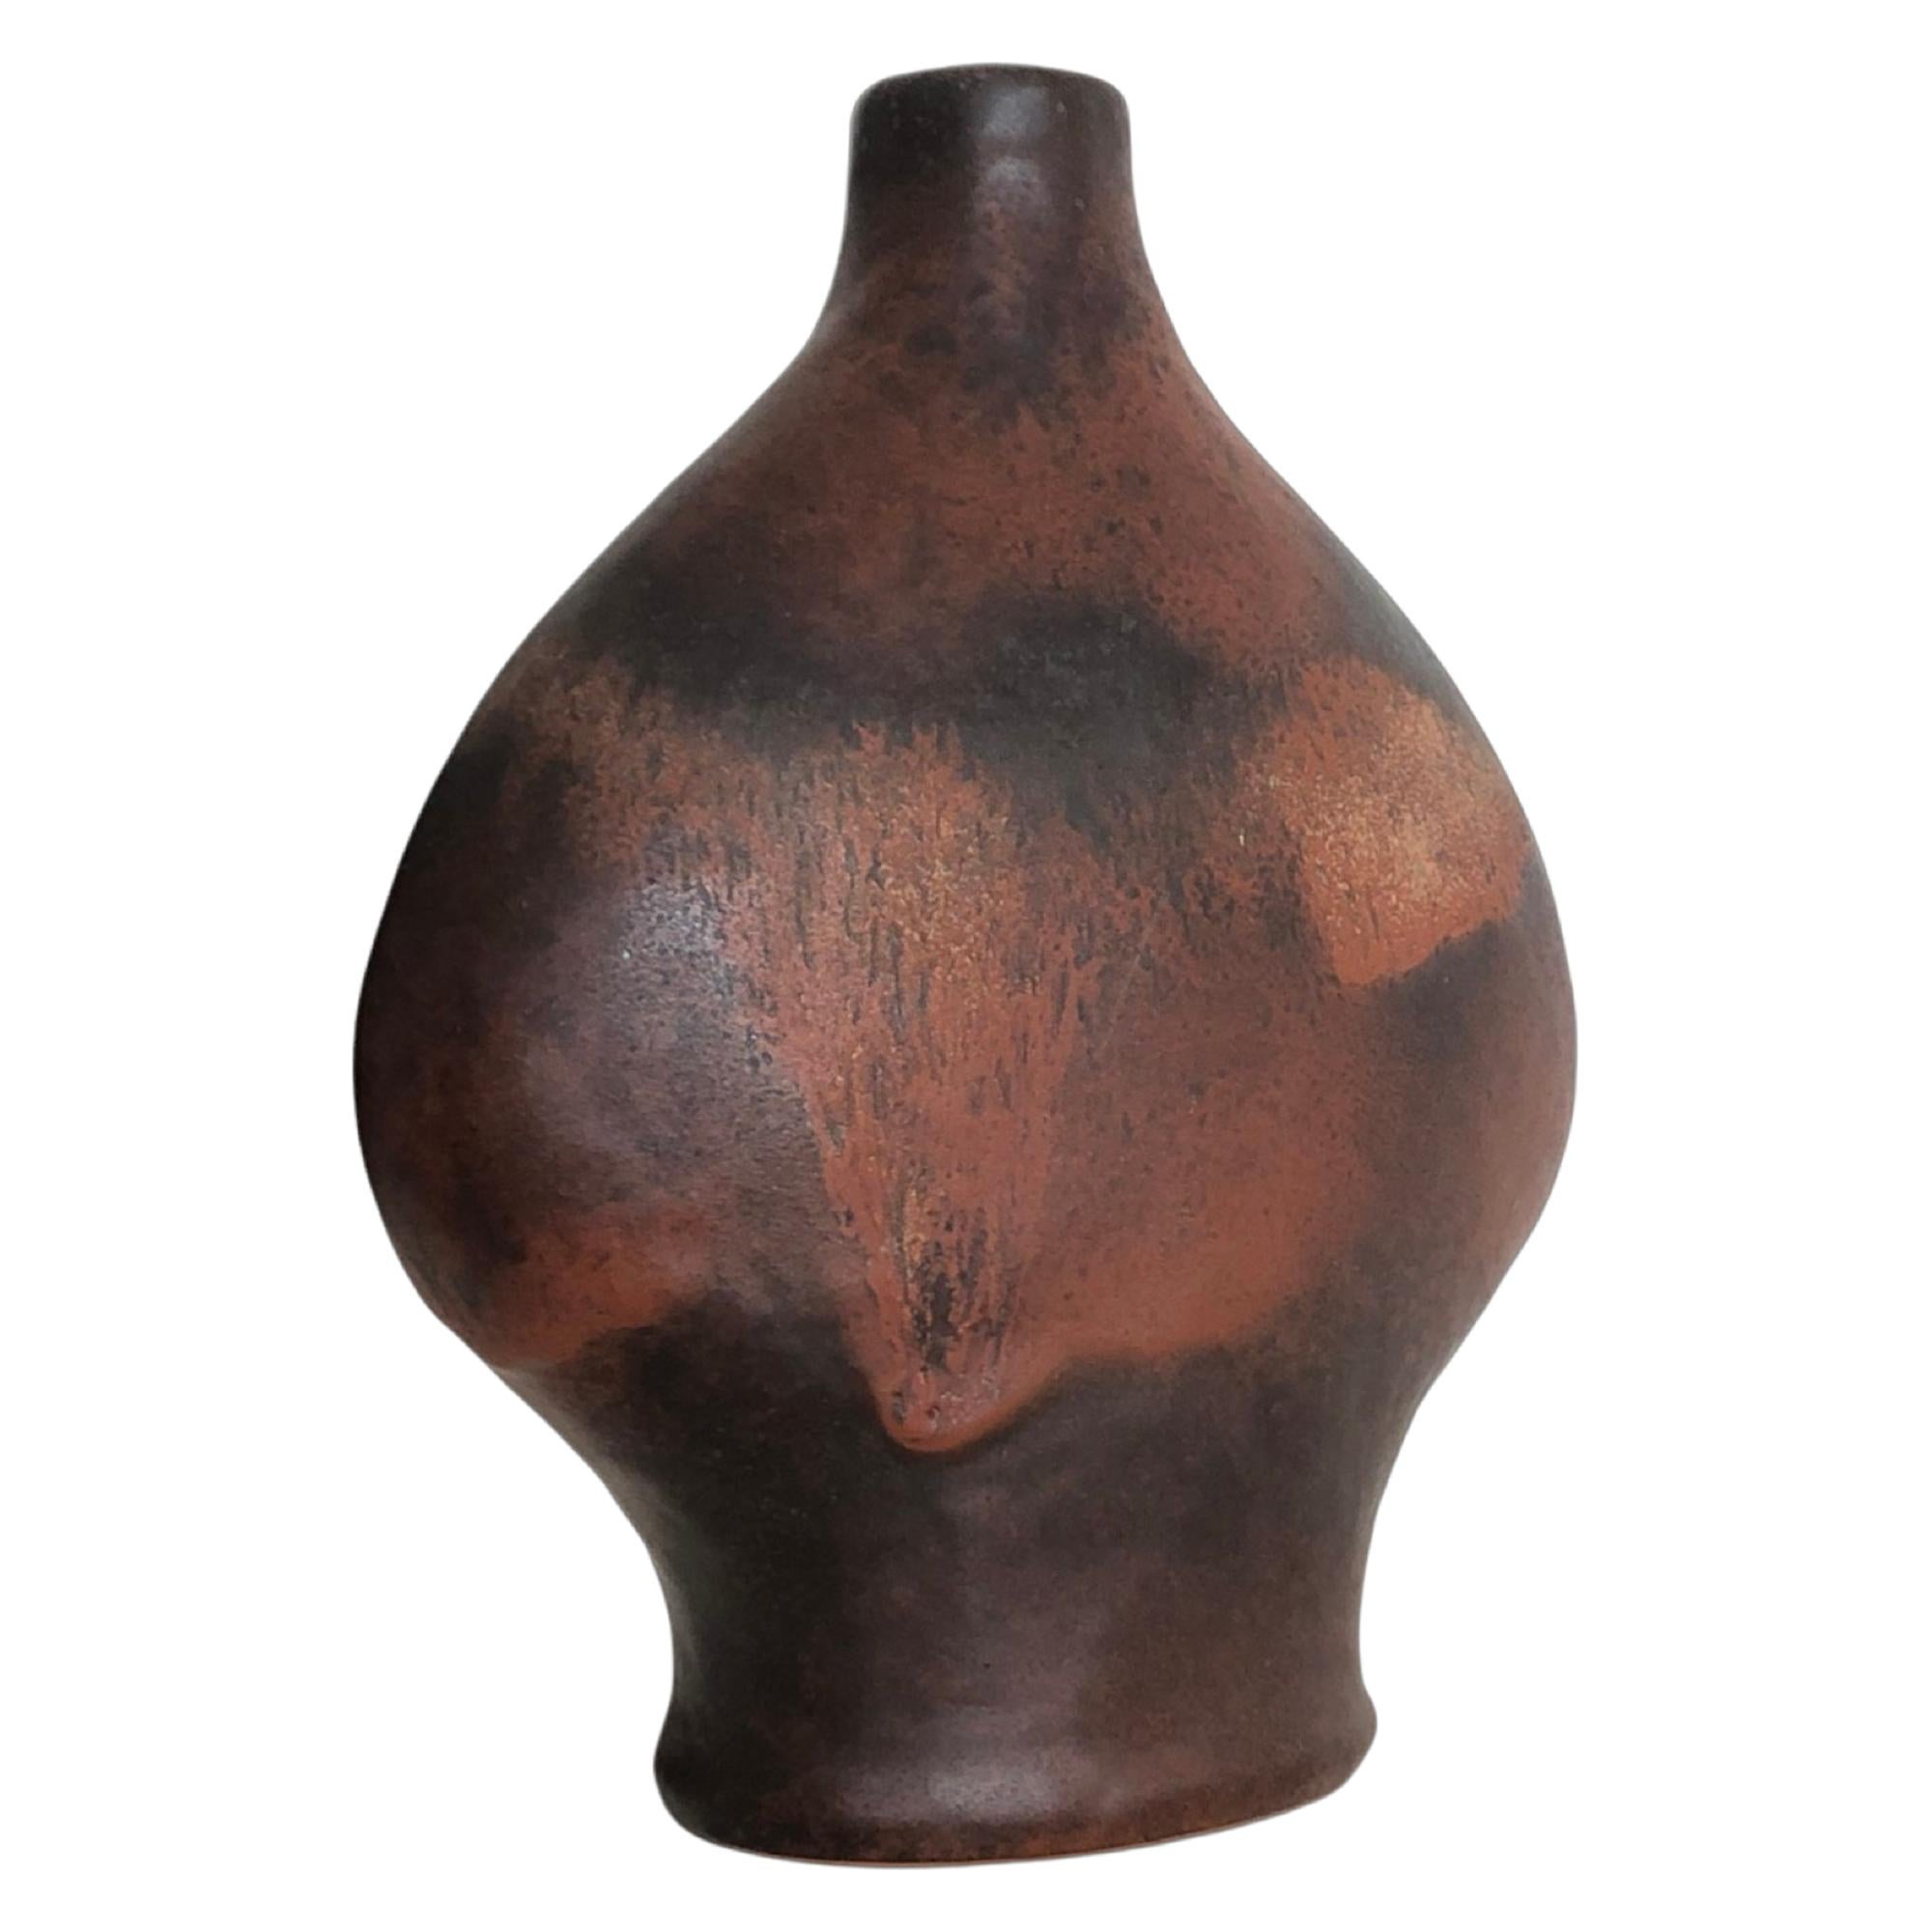 This is an earthy vase by West German pottery designer Gerda Heuckeroth for CARSTENS TONNIESHOF’s more expensive 'Atelier'-line. The designer’s masterful use of drip glaze (fat lava) underlines the organic shape and gives this vase a very natural